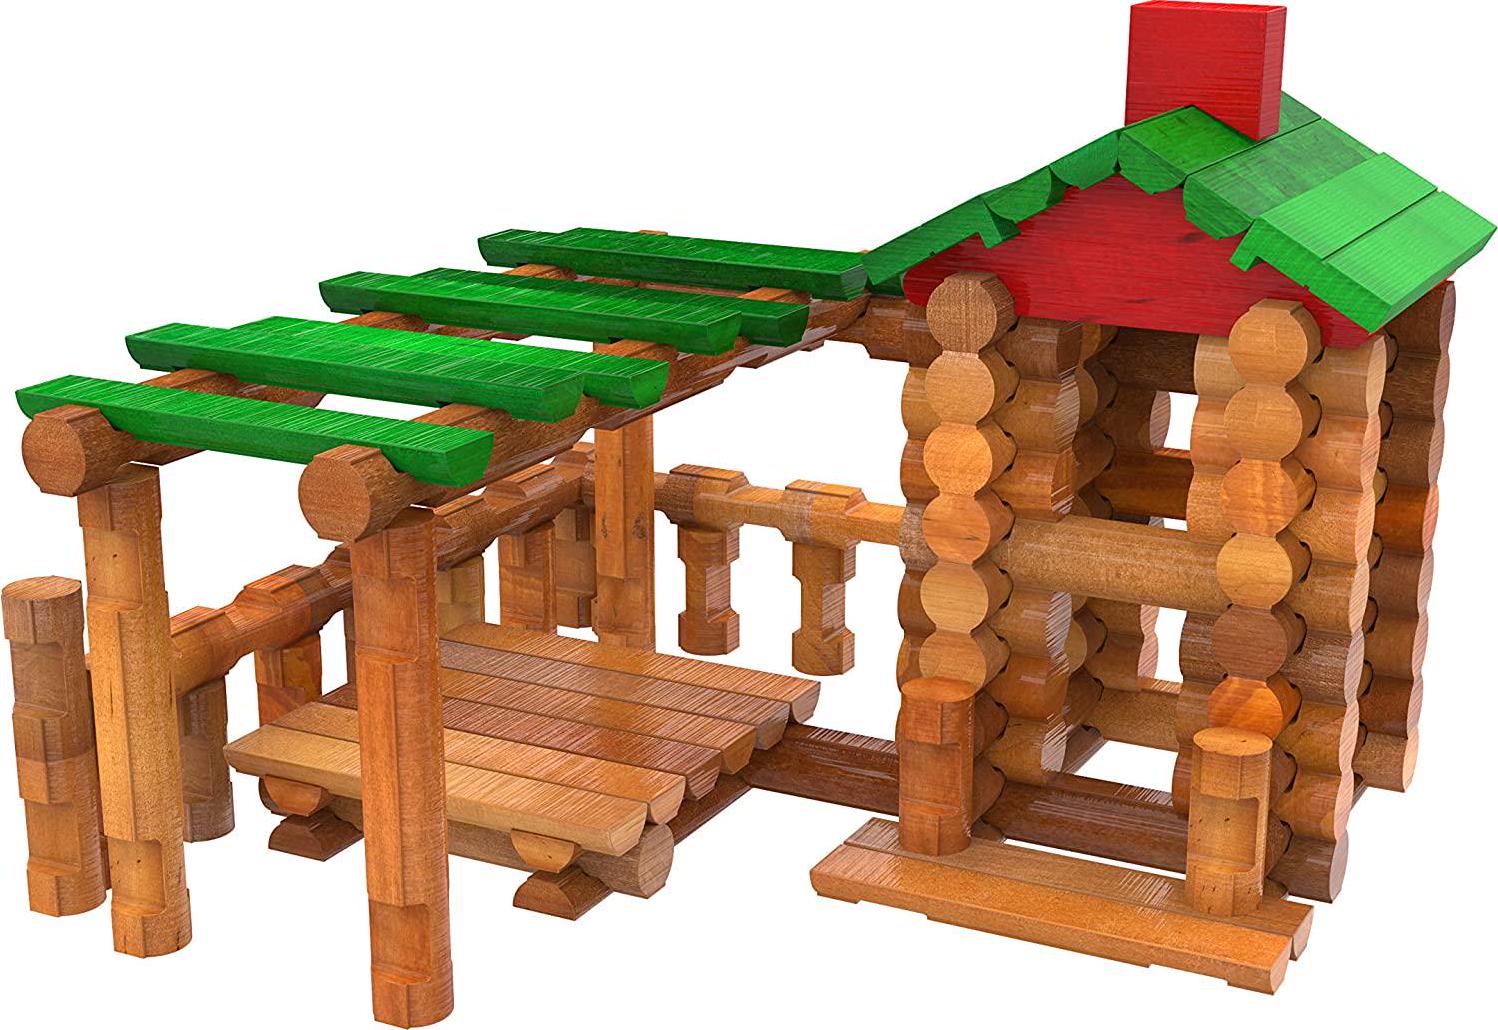 Lincoln Logs, Lincoln Logs Classic Meetinghouse, Collectible Tin - 117 Parts, Real Wood Logs - Ages 3+ - Retro Building Set for Boys/Girls Creative Construction Engineering, Preschool Toy